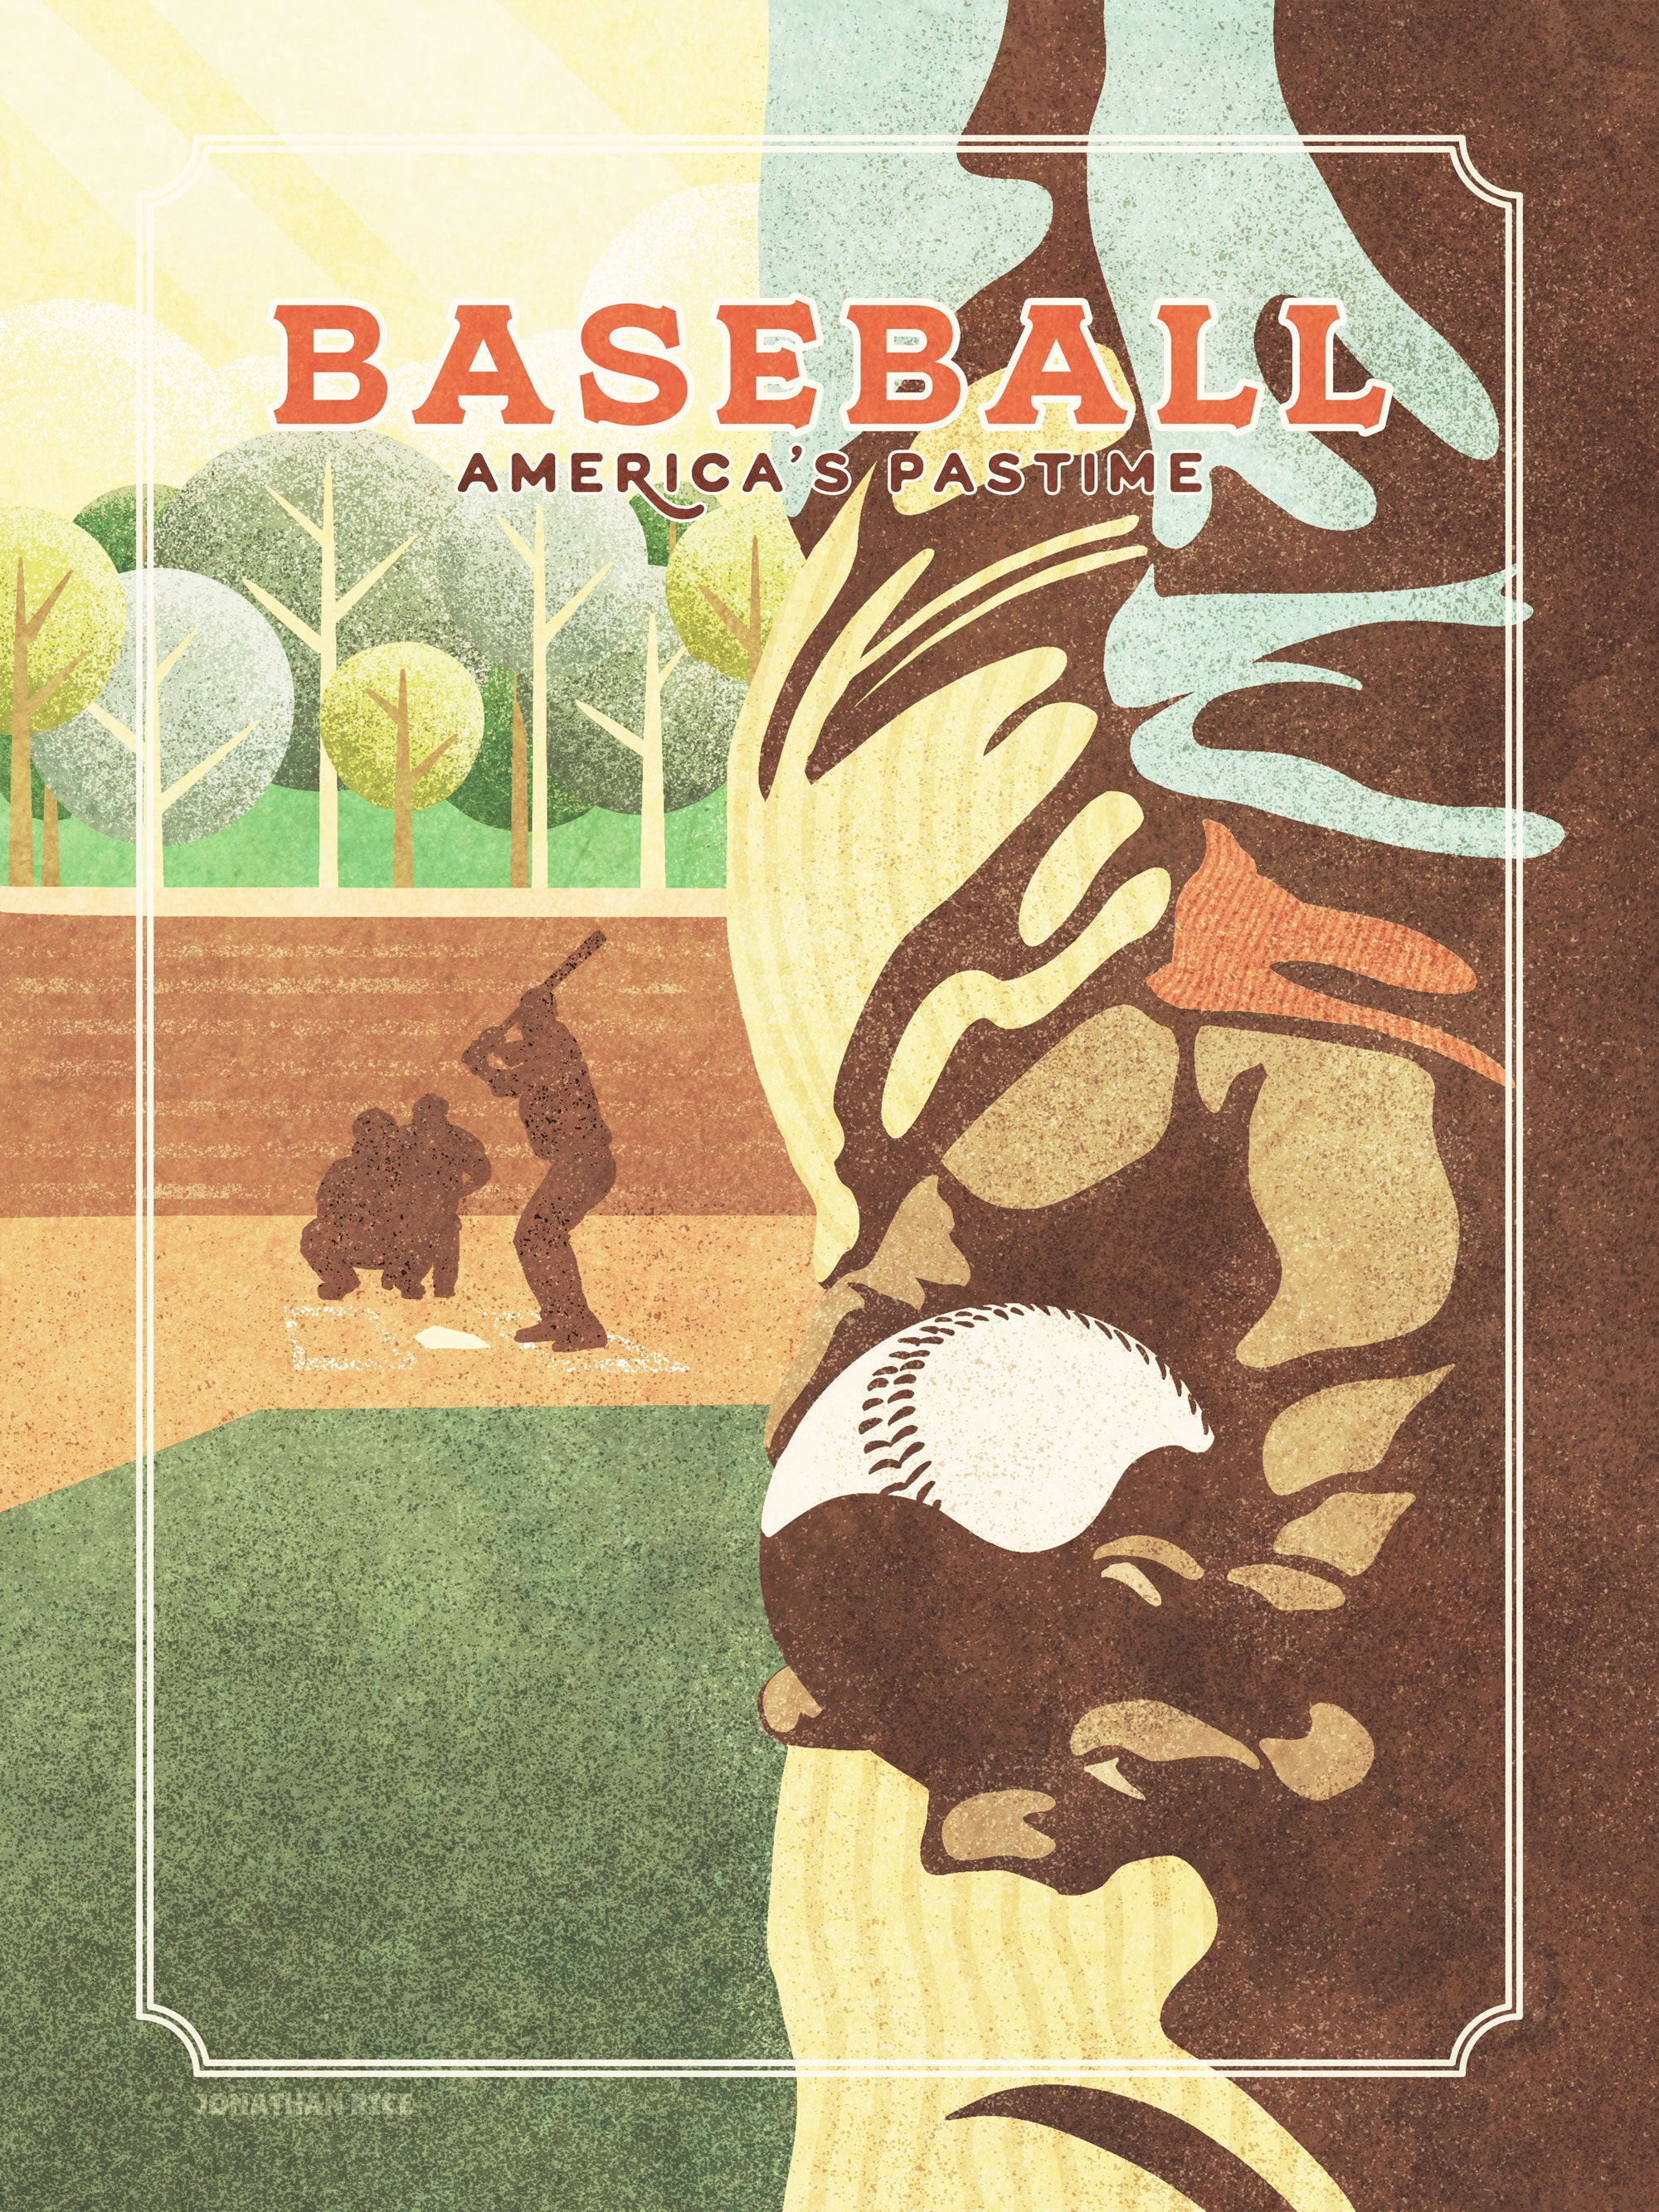 Retro styled giclée art print of an American Baseball Pitcher’s hand holding the ball in the extreme foreground with the batter, catcher and umpire in the background. It’s warm color palette, gritty texture and vintage typography will make a great impression in any room.